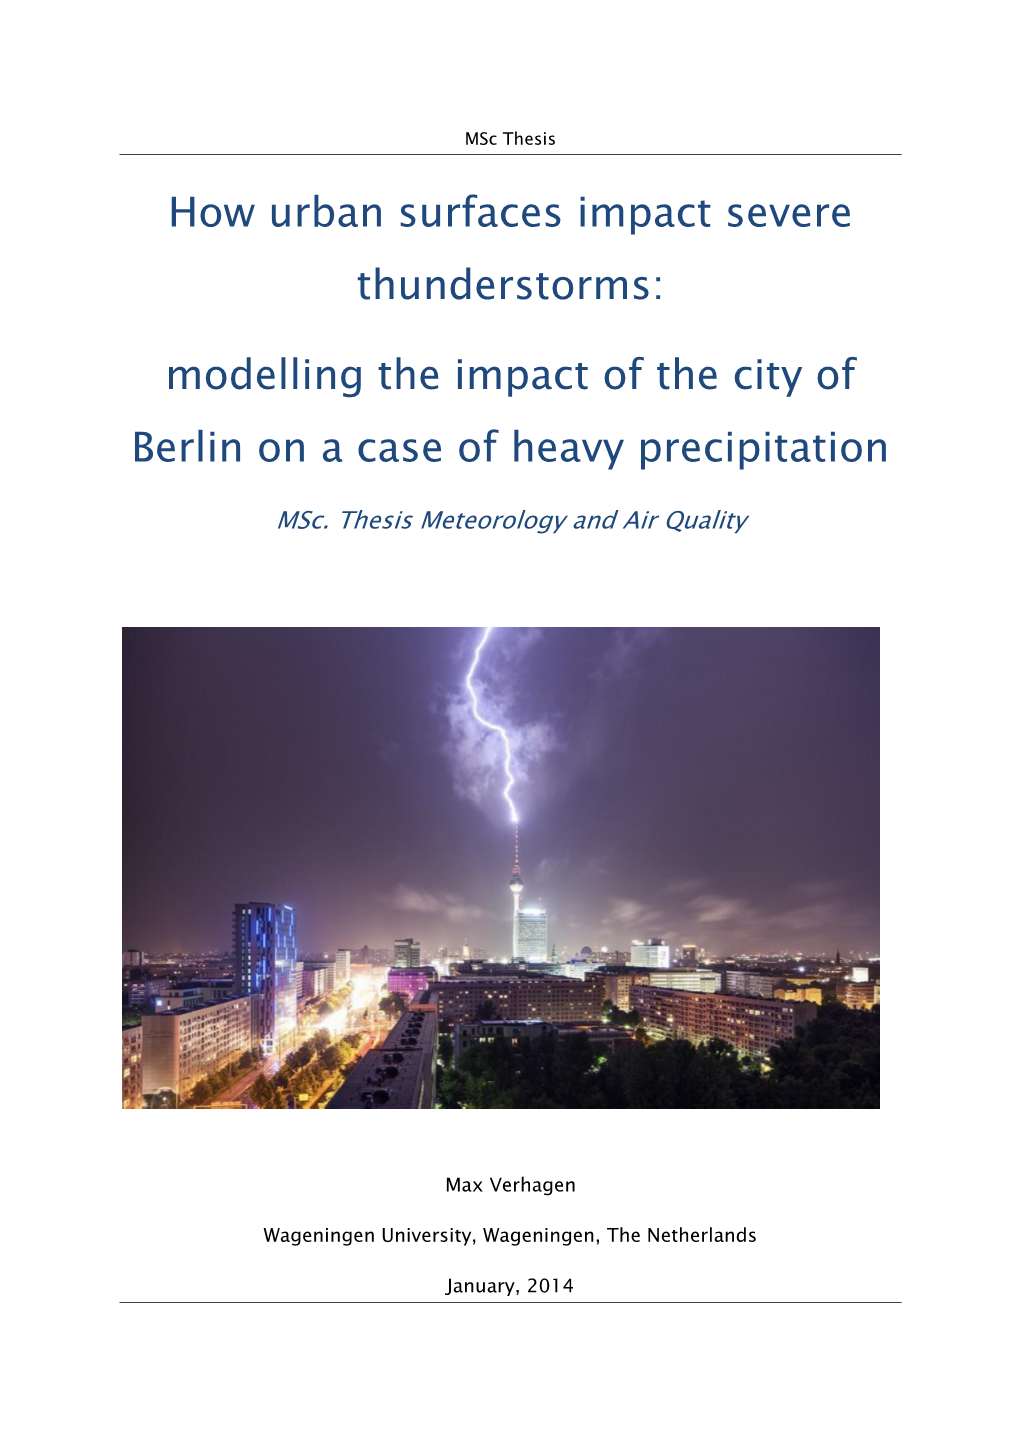 How Urban Surfaces Impact Severe Thunderstorms